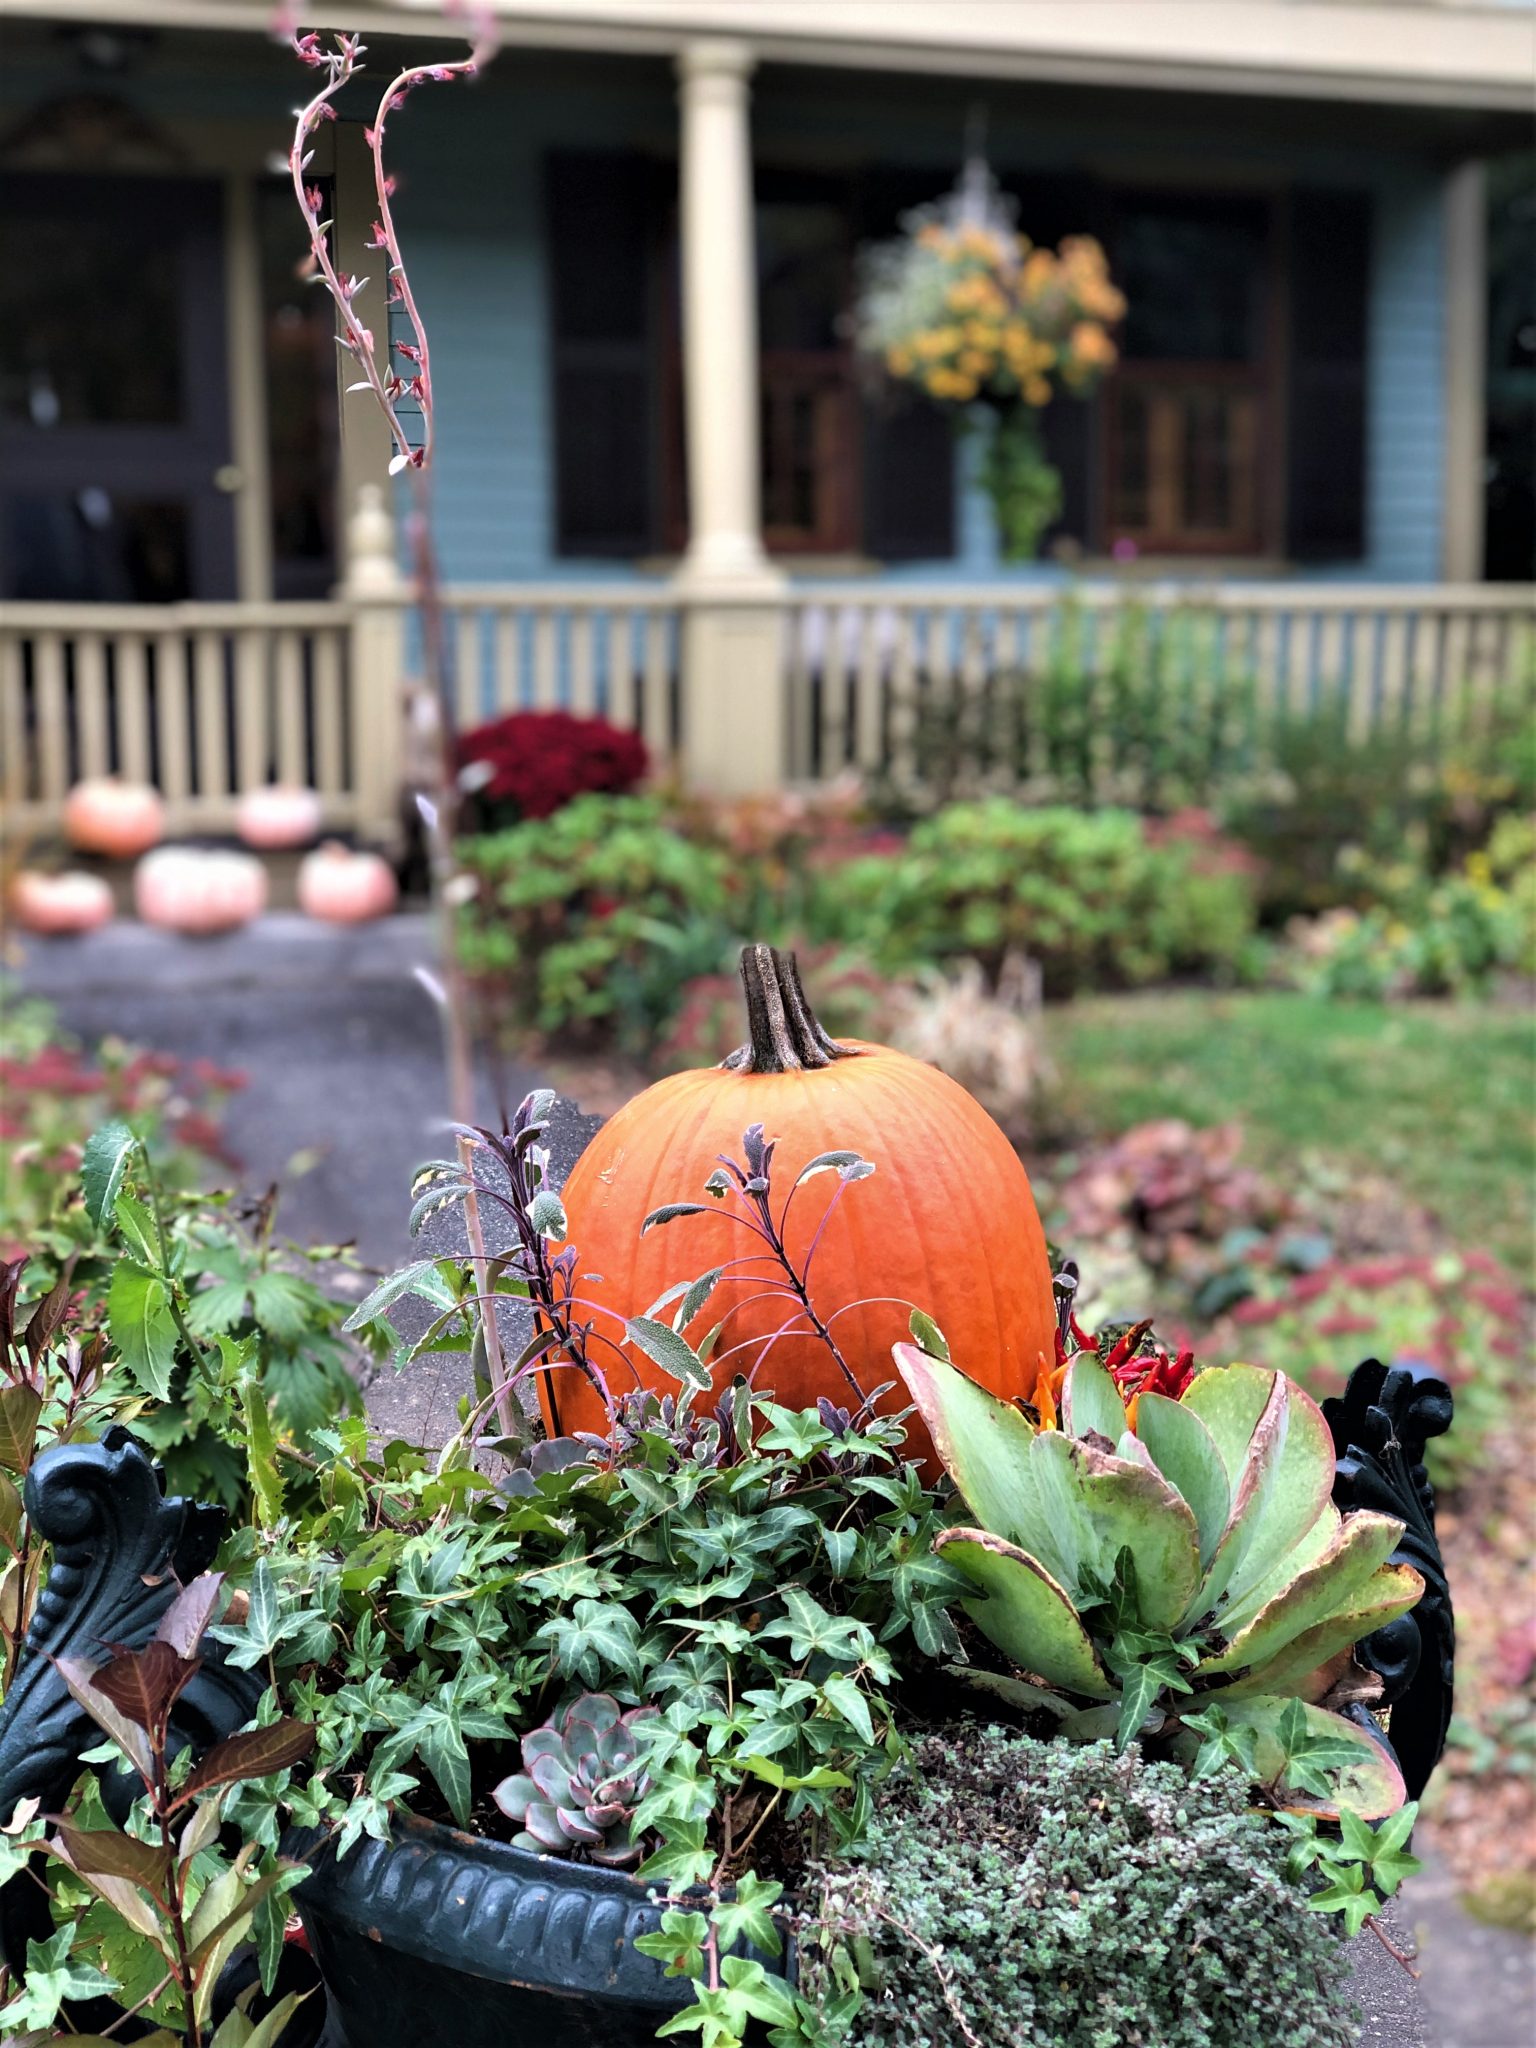 Flower pots decorated with a pumpkin